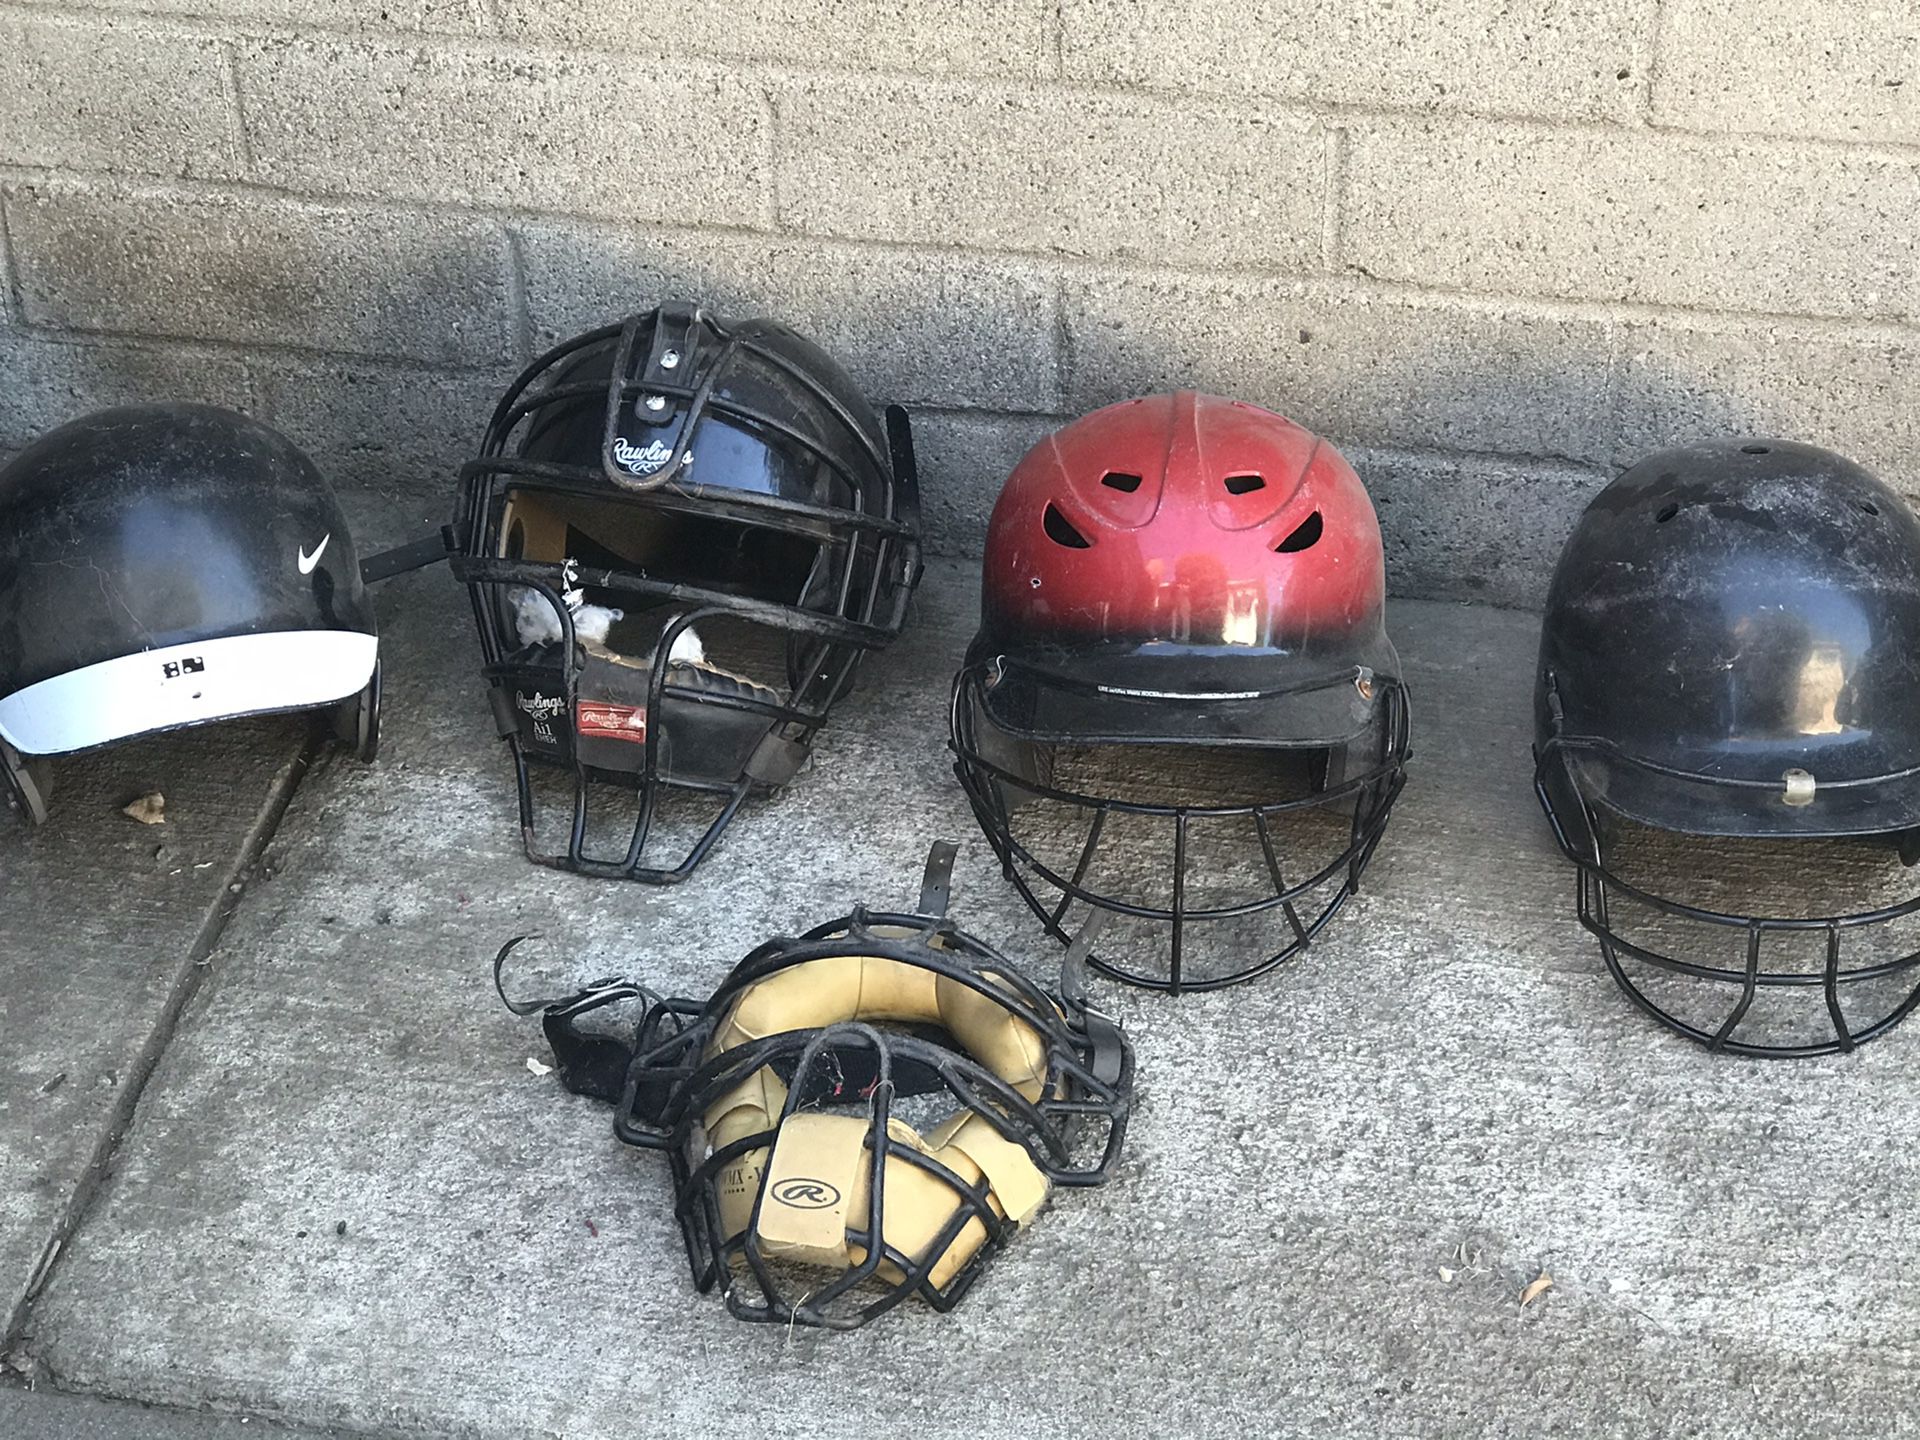 Baseball softball equipment. Helmets and bats. Take 1 piece or everything for a great deal.